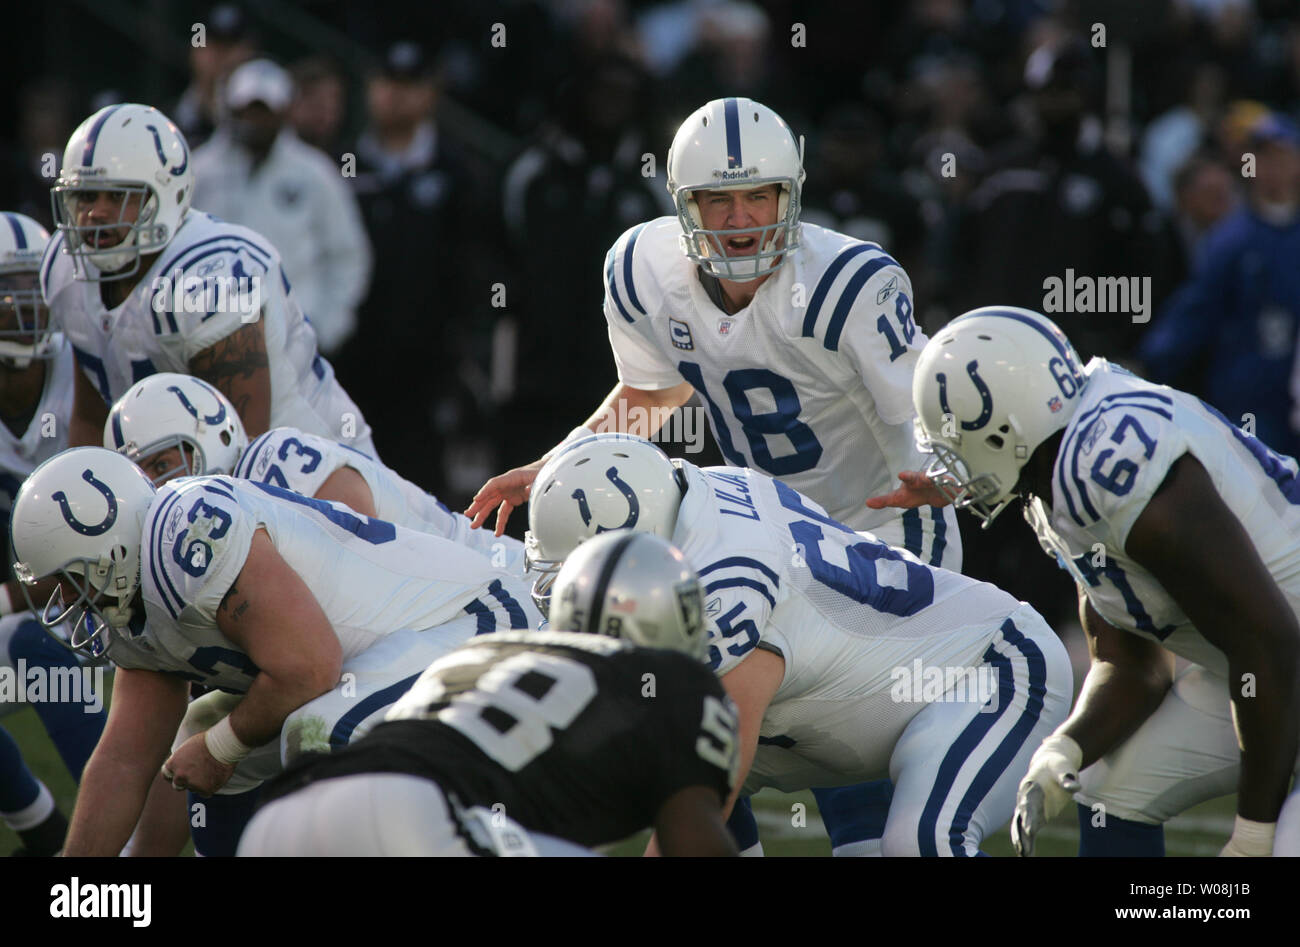 Indianapolis Colts QB Peyton Manning changes a play at the line against the Oakland Raiders in the third quarter at Oracle Coliseum in Oakland, California on December 16, 2007.  The Colts defeated the Raiders 21-14.  (UPI Photo/Terry Schmitt) Stock Photo